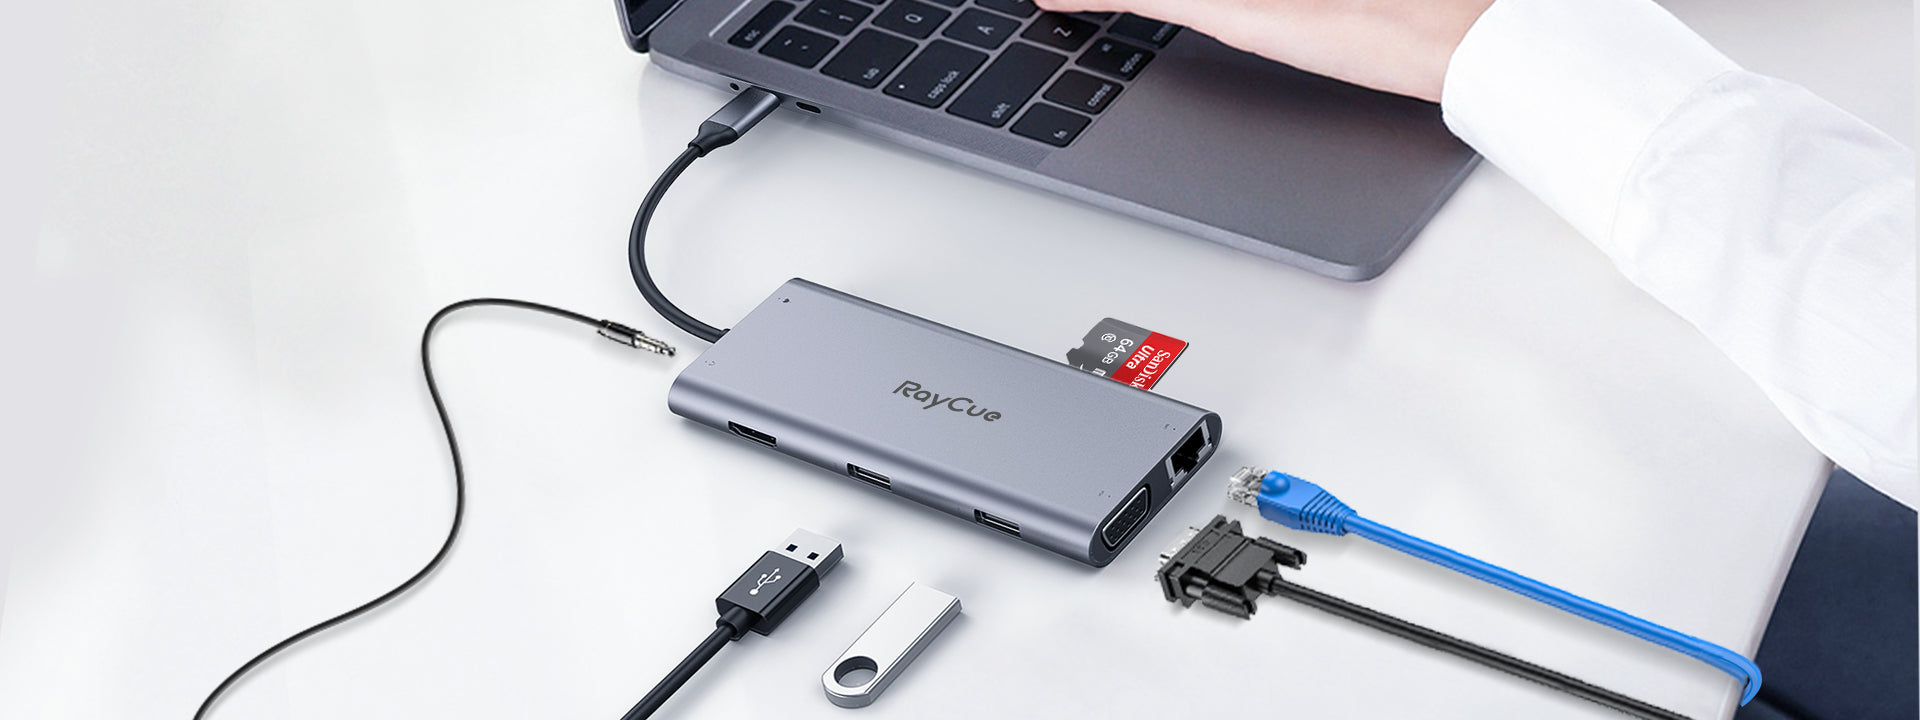 RayCue USB-C Super Dock - Connect Your Entire Workstation